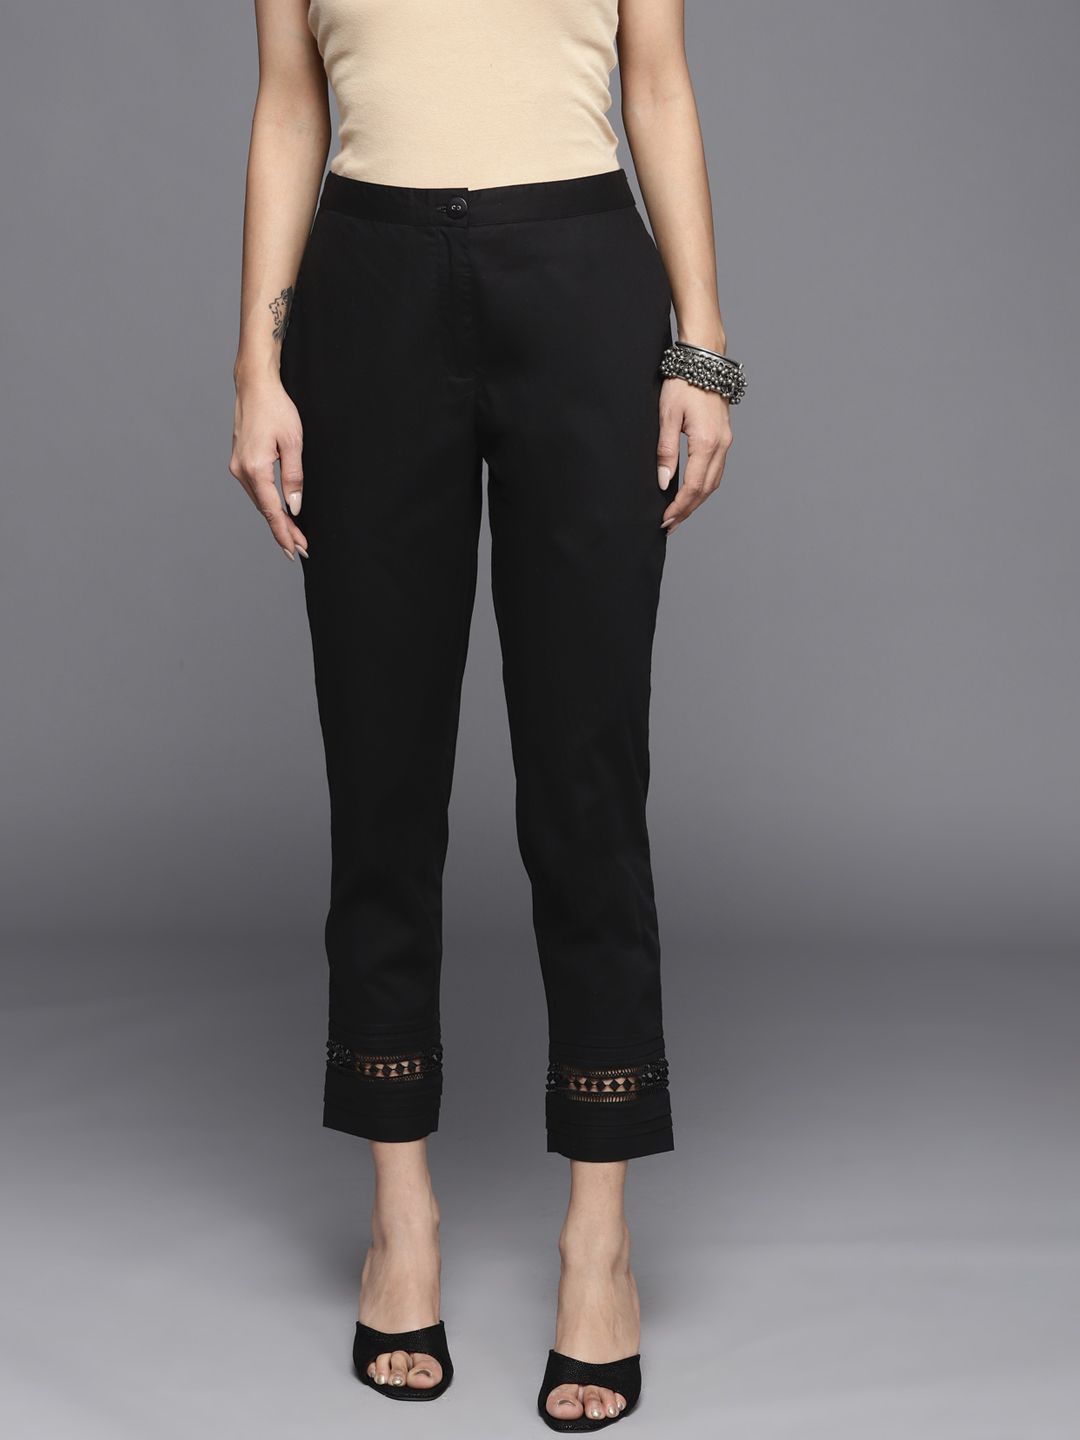 Libas Women Black Trousers Price in India